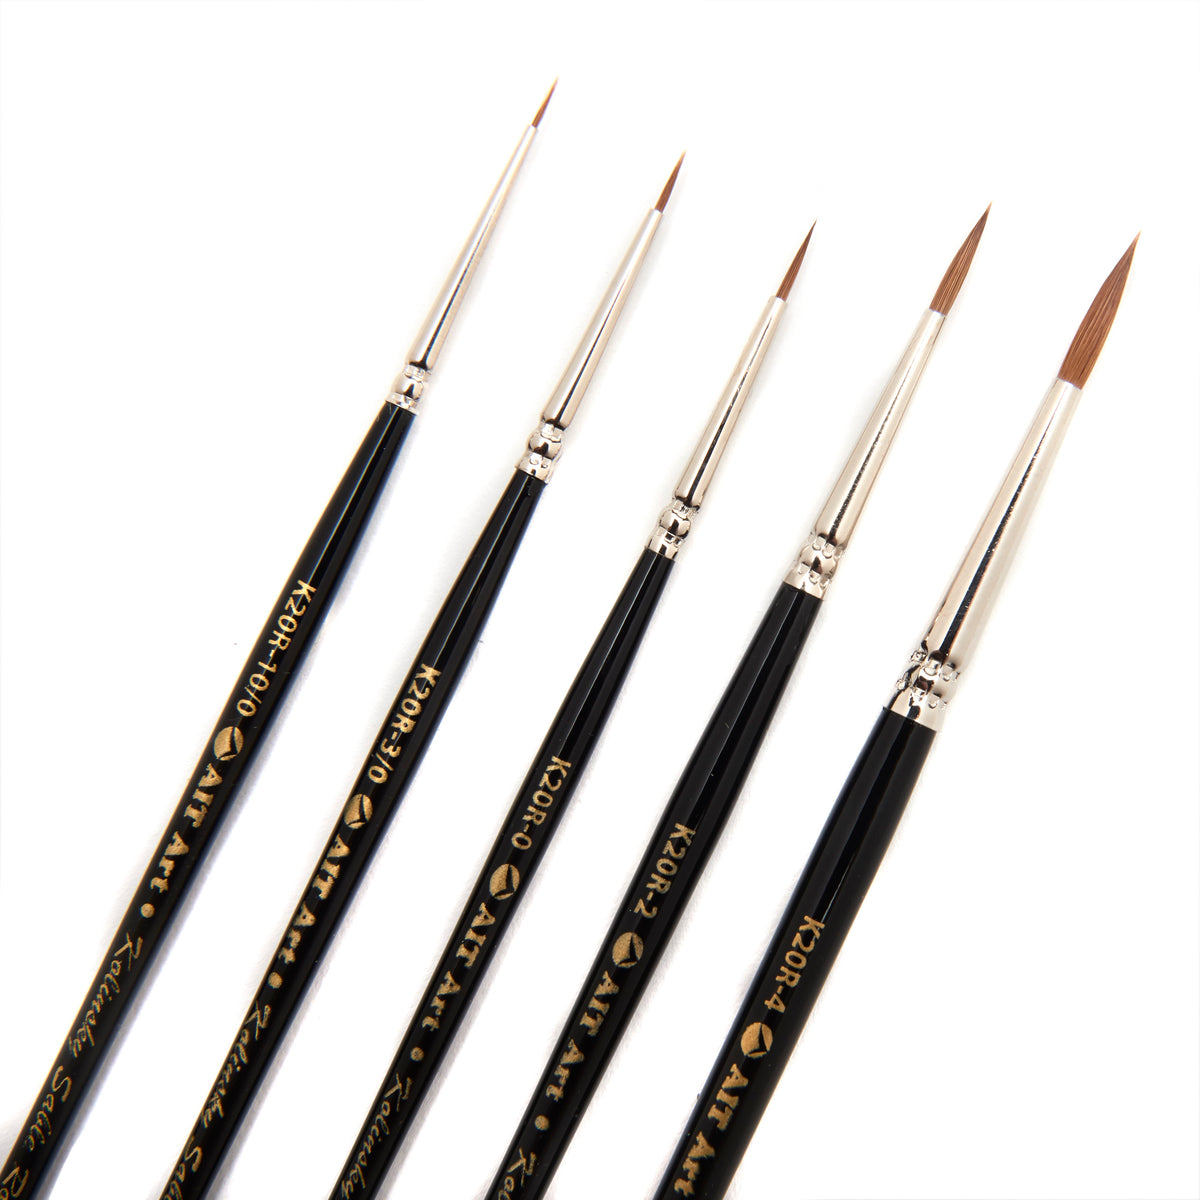 AIT Art Select, Set of 7 Pure Russian Sable Detail Paint Brushes